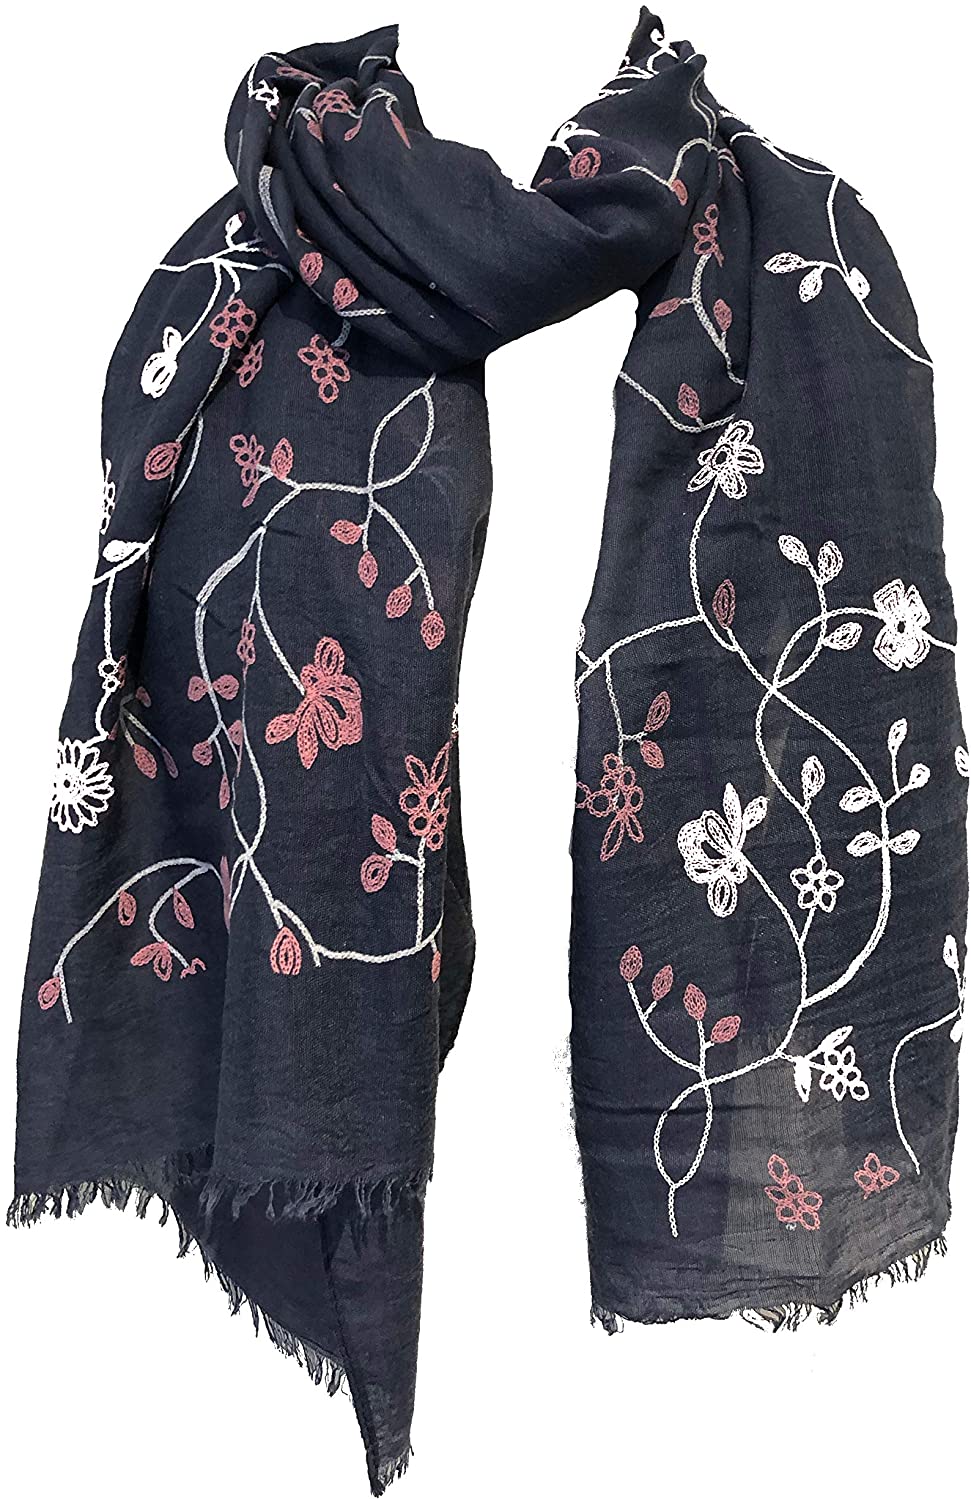 Blue with pink embroidered flowers and leaf design long Scarf/wrap with frayed edge